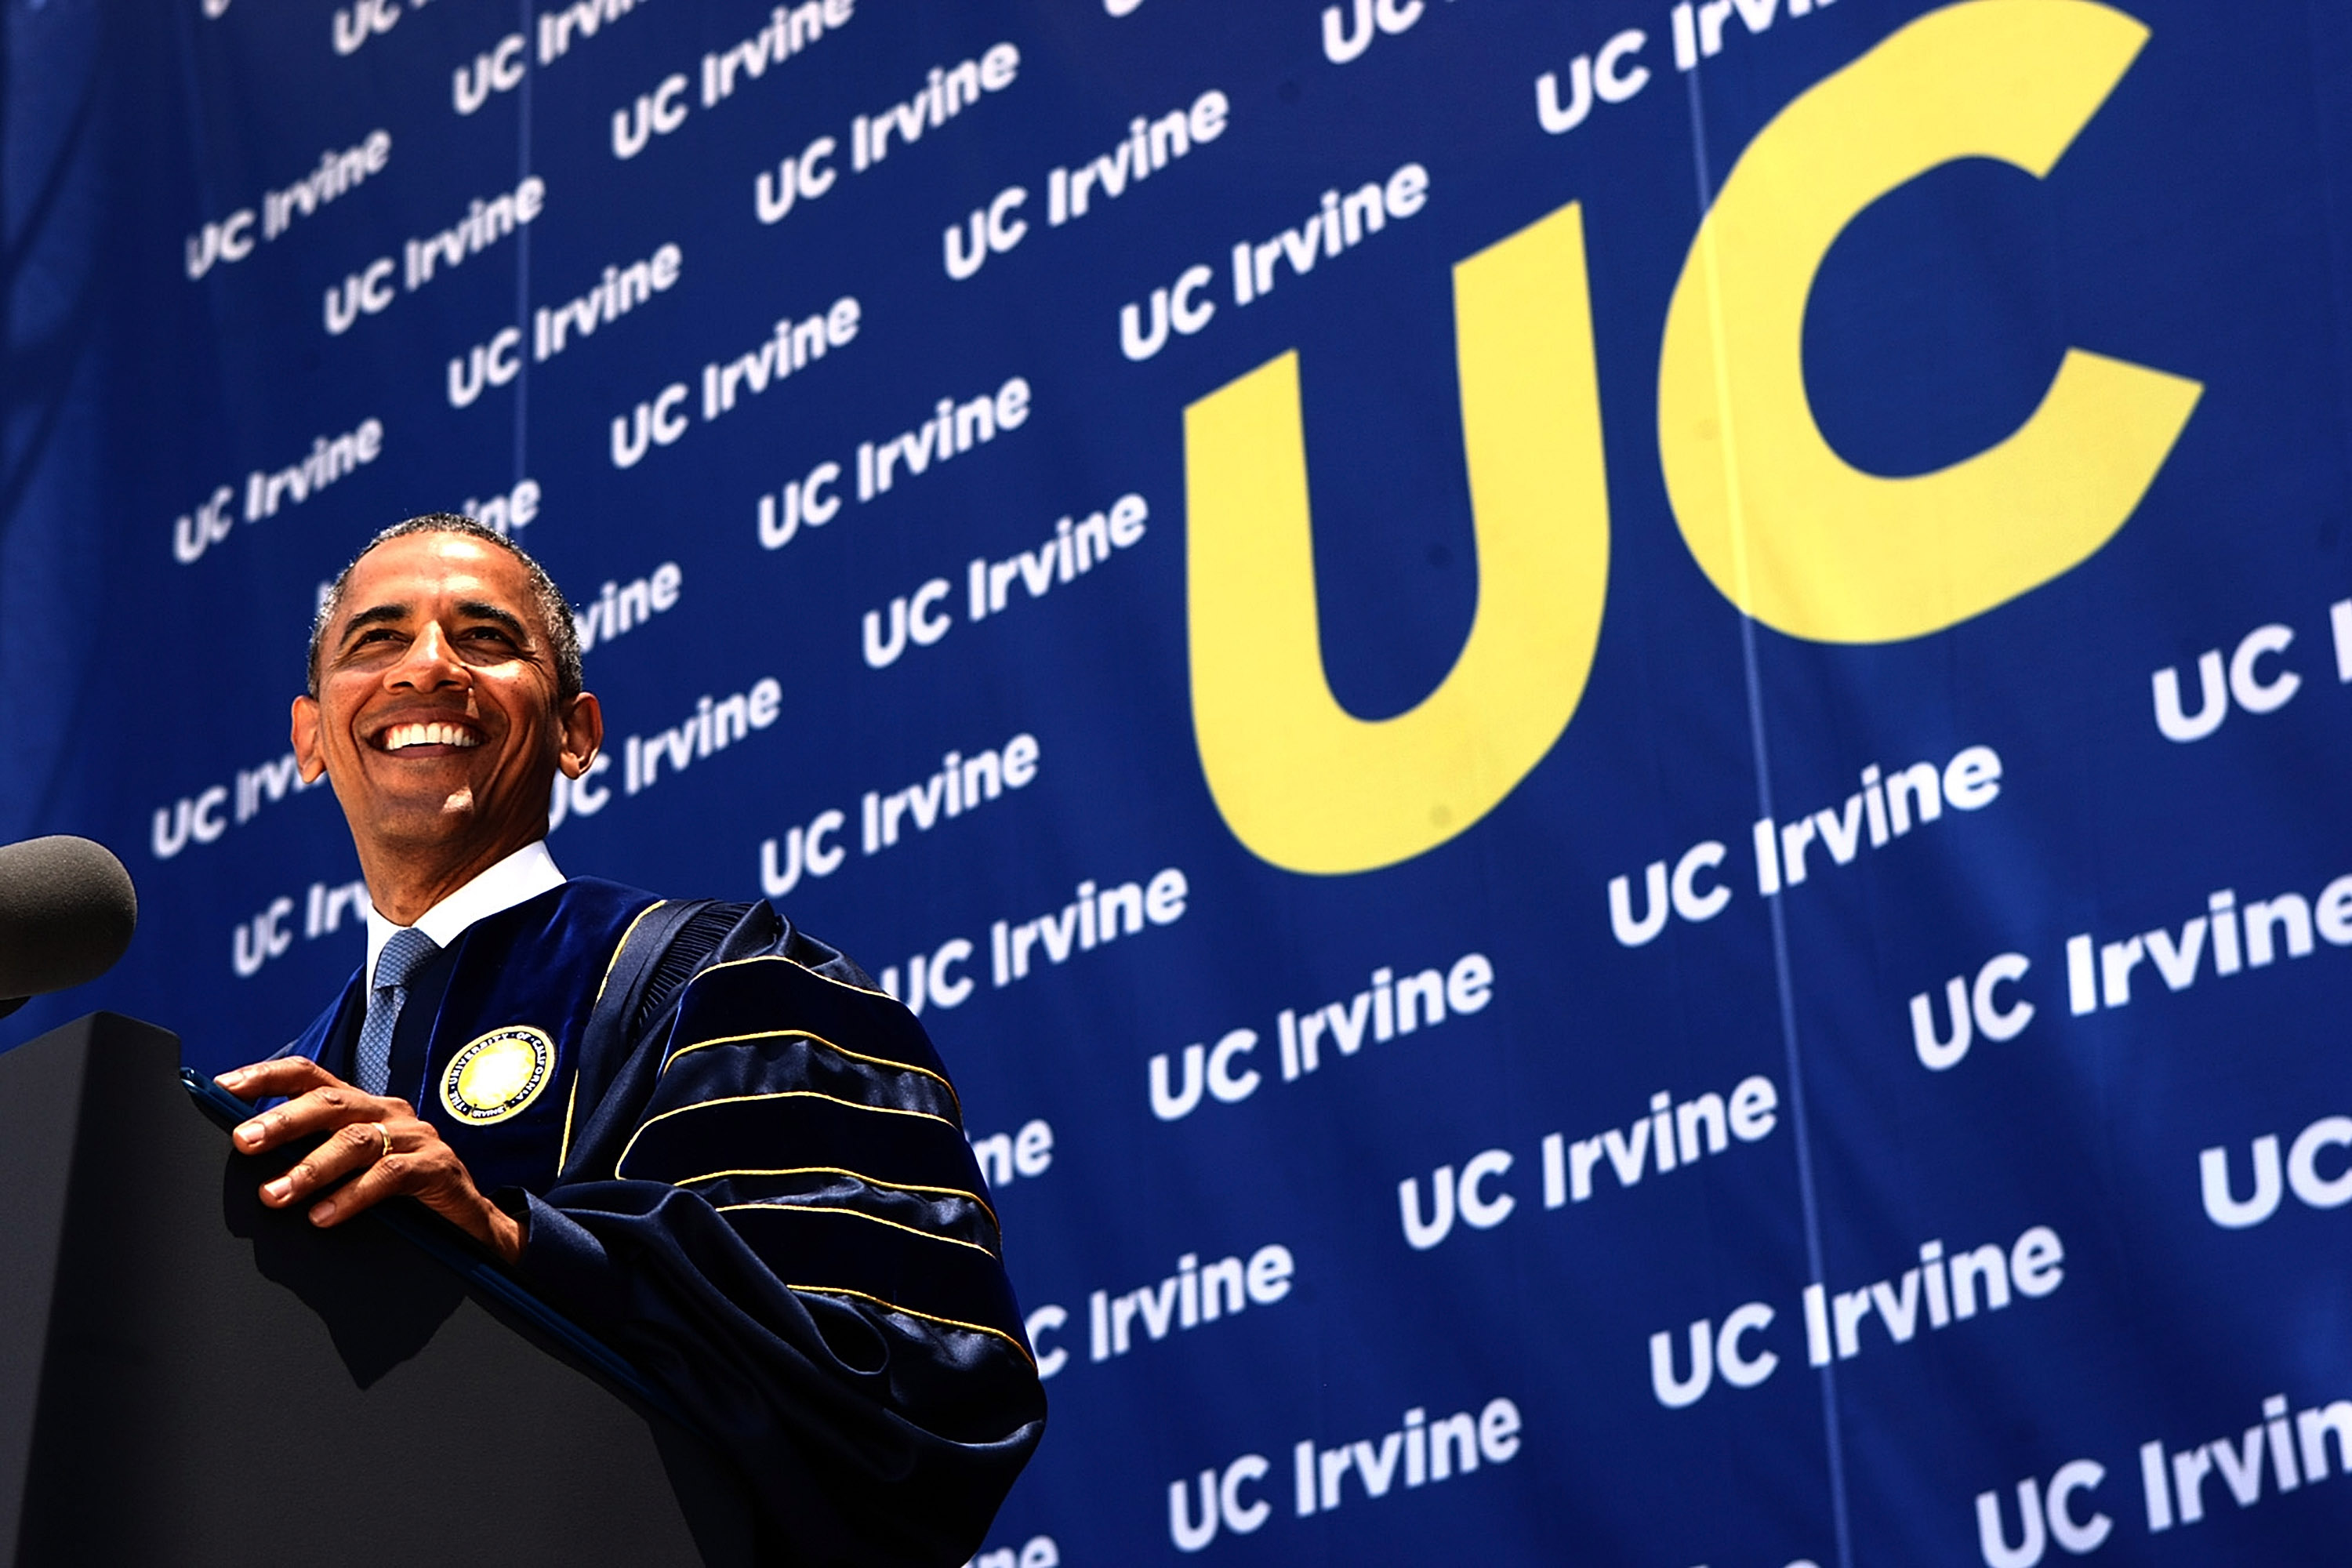 President Barack Obama speaks at the UC Irvine commencement ceremony on June 14, 2014 in Anaheim, California. (Pool/Getty Images)